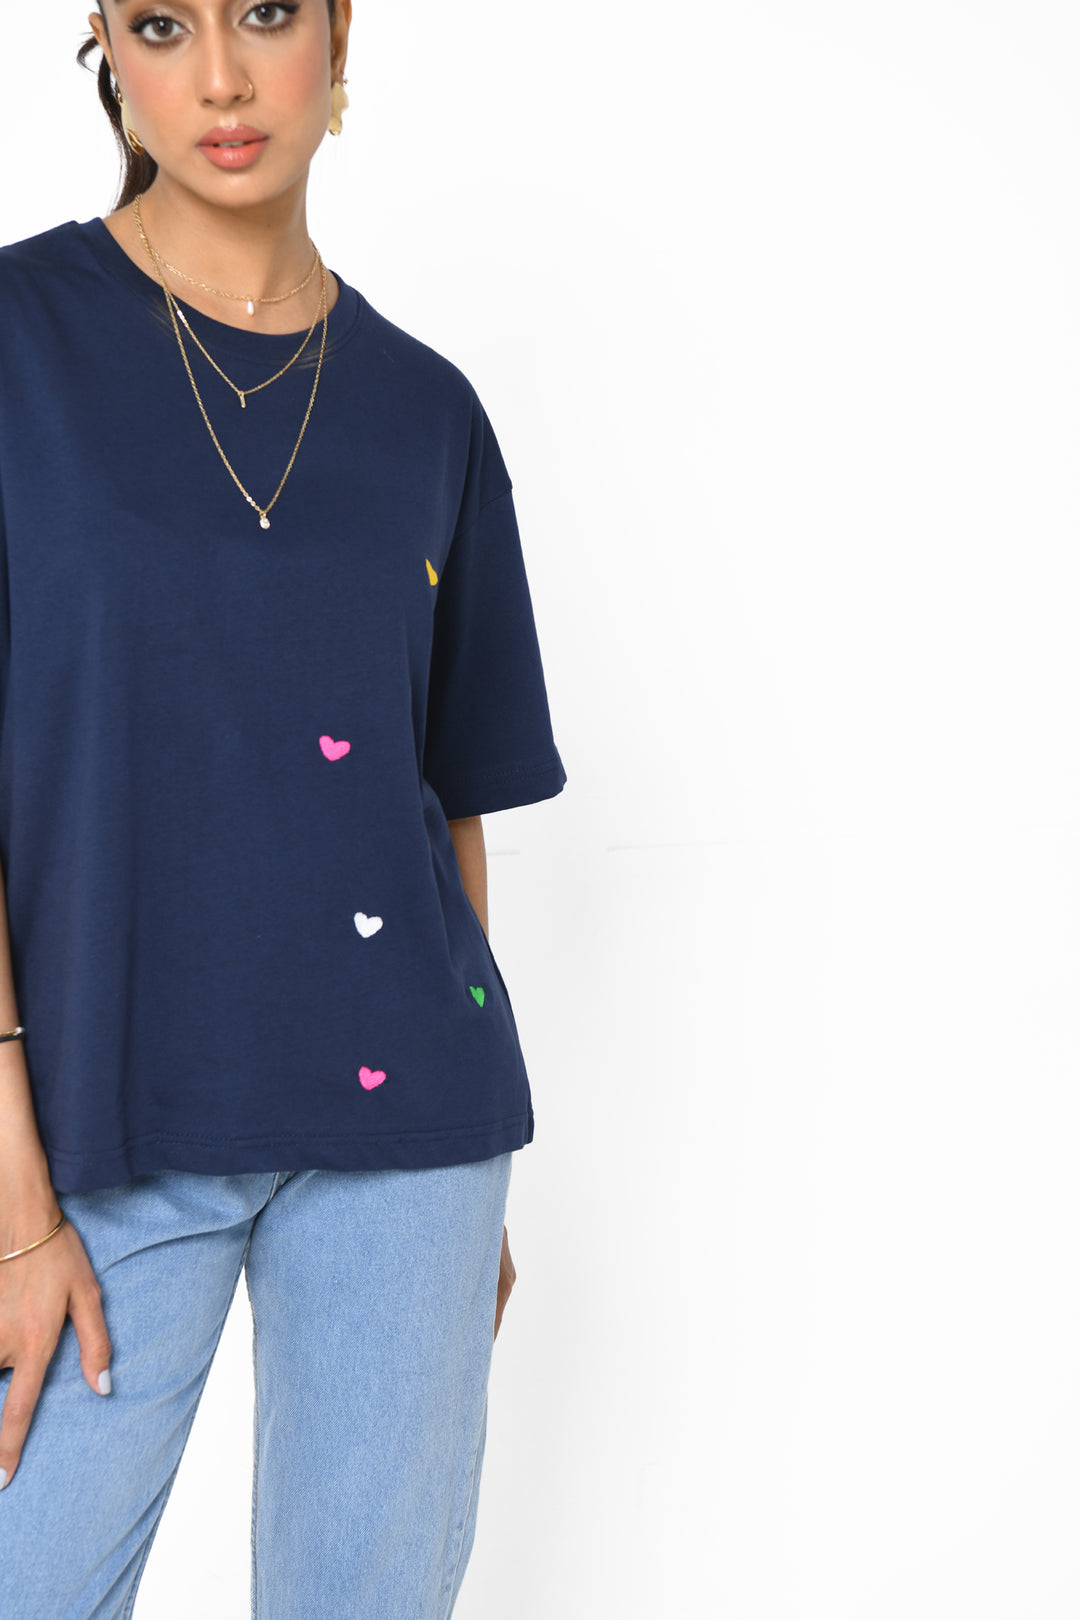 OVERSIZE EMBROIDERED TSHIRT